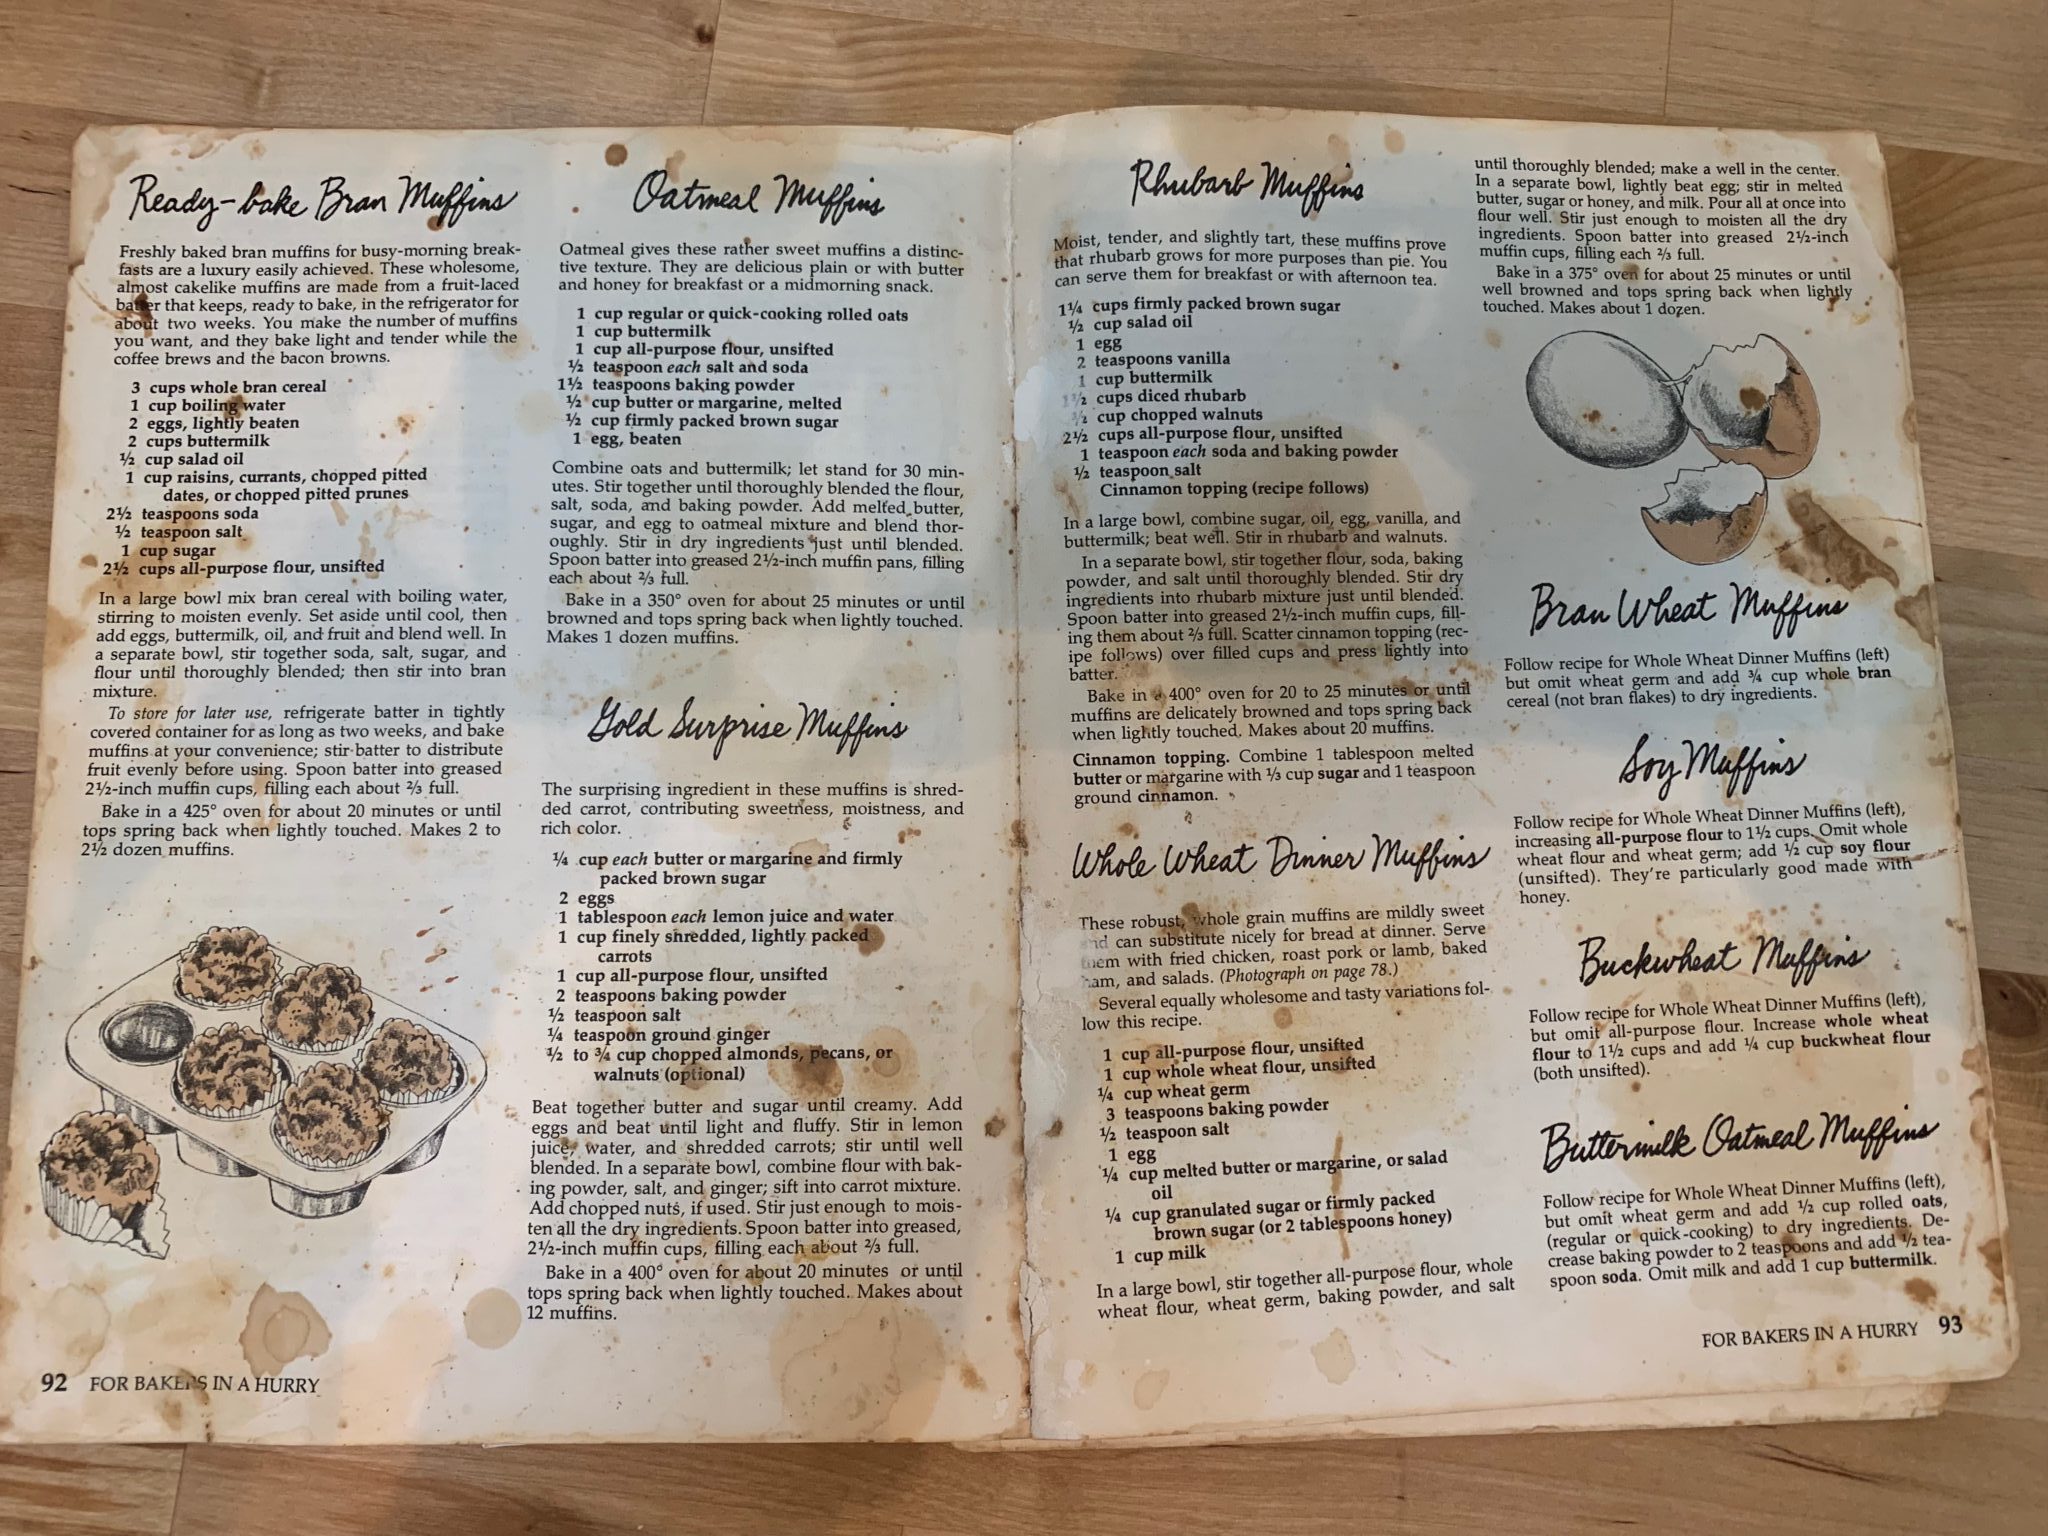 Old Cookbook with food stains and splatters